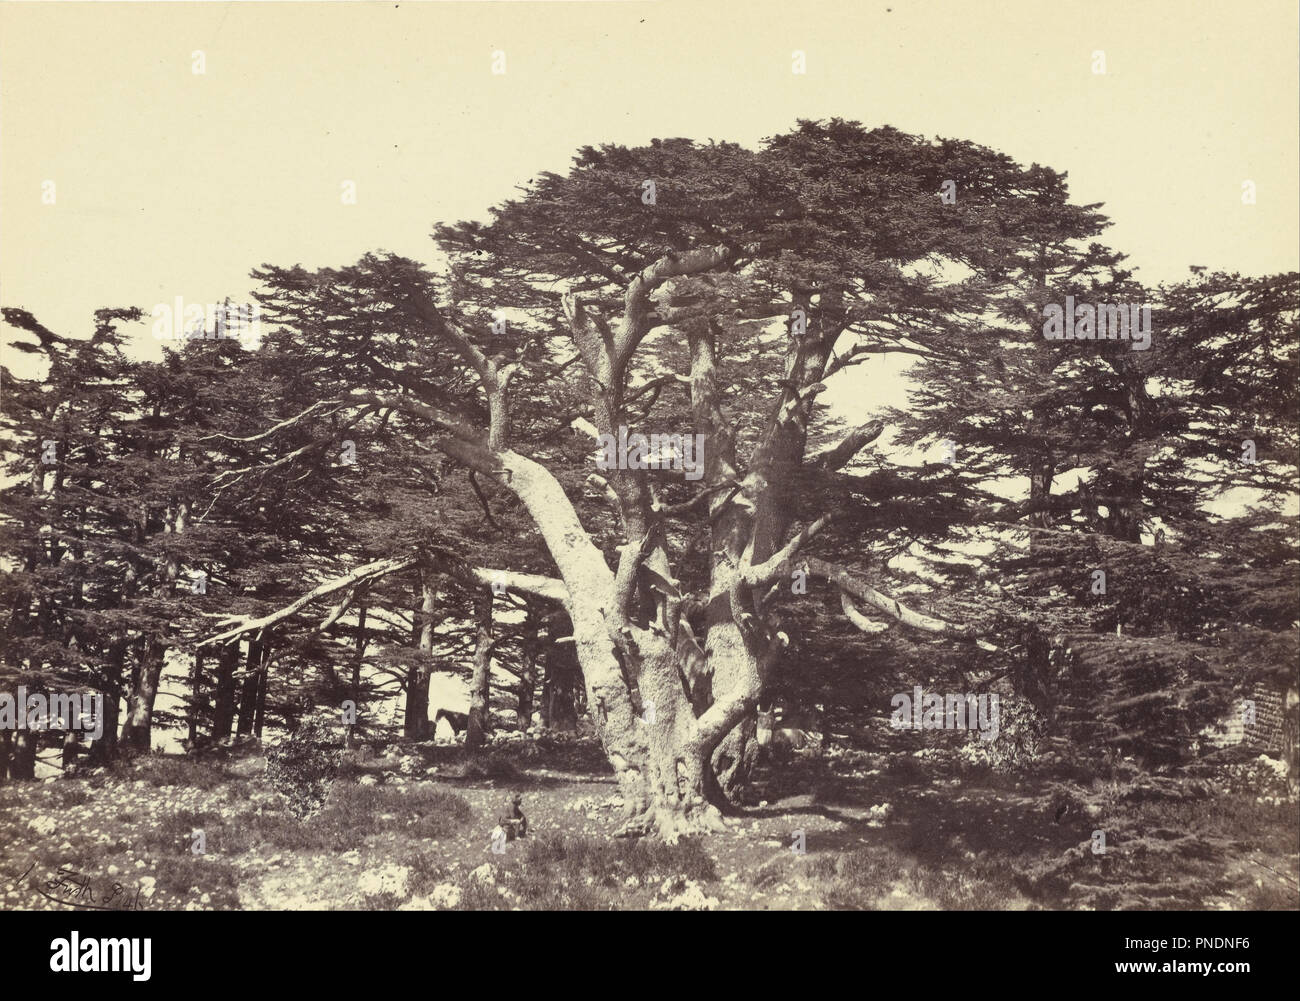 The Largest of the Cedars, Mount Lebanon. Date/Period: Negative 1856 - 1860; print 1862 - 1863. Print. Albumen silver. Height: 162 mm (6.37 in); Width: 230 mm (9.05 in). Author: Francis Frith. Stock Photo